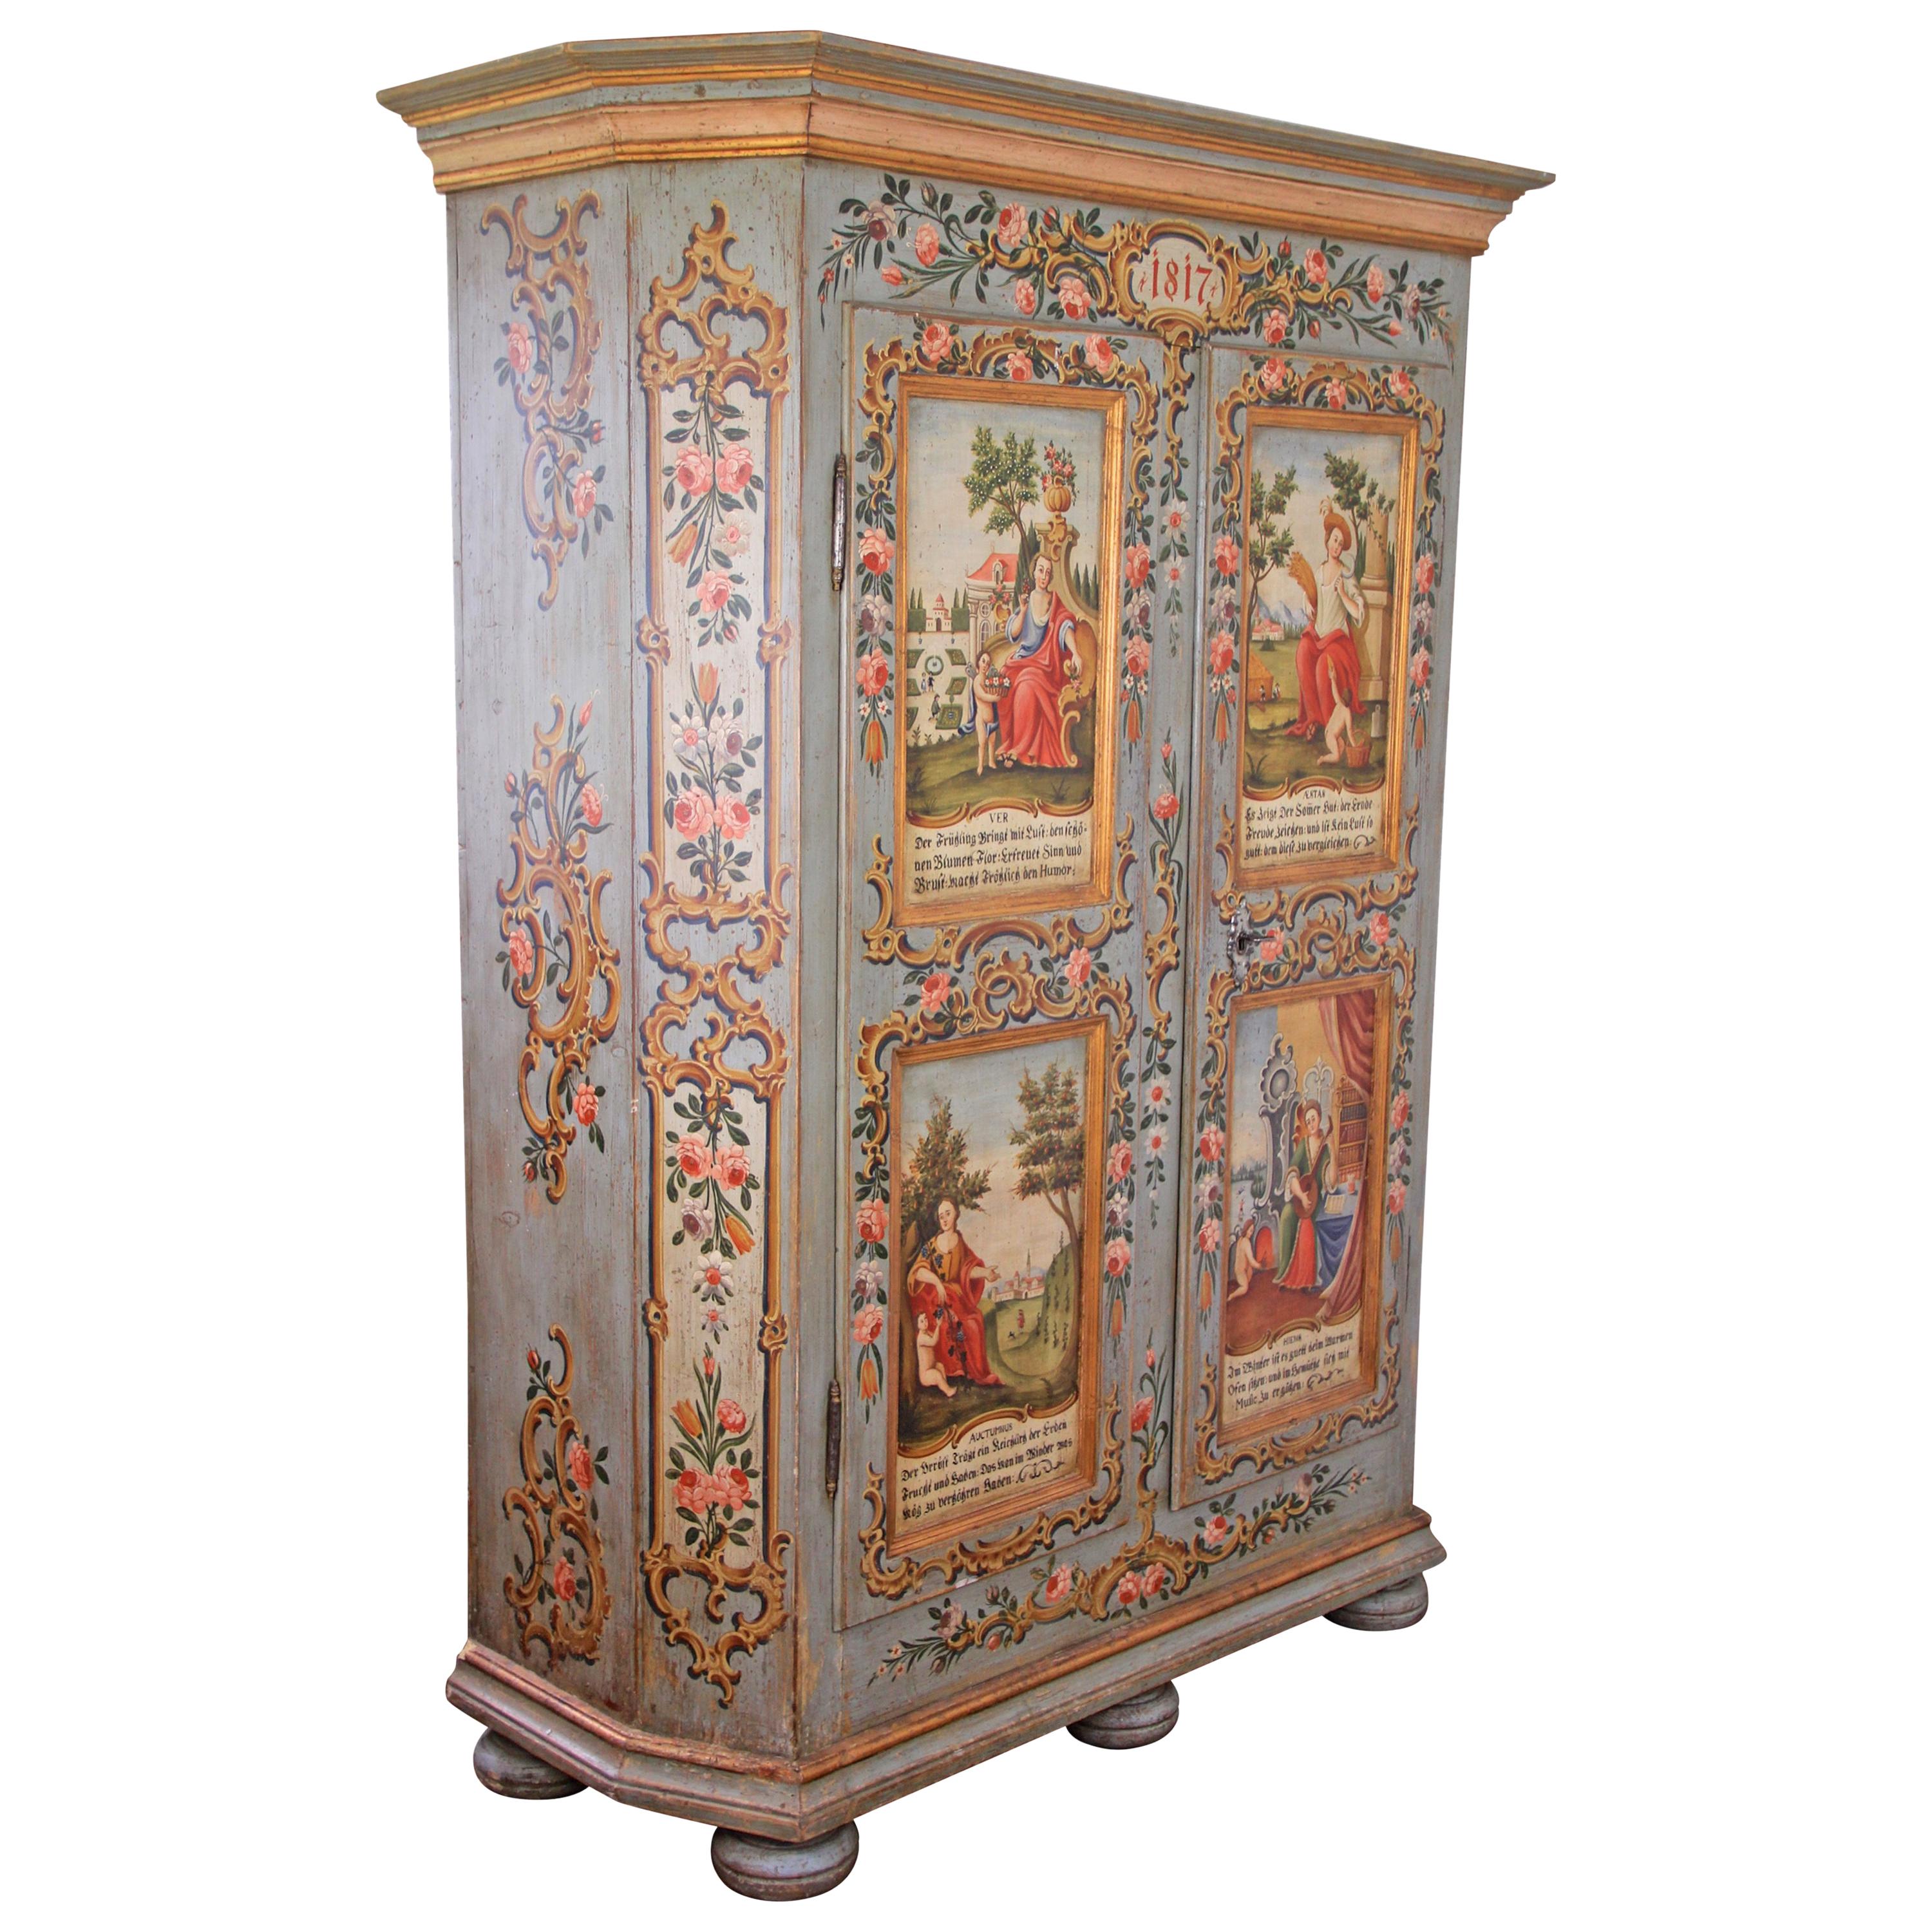 Rustic Cabinet "The Four Seasons" Hand Painted, Austria Dated 1817